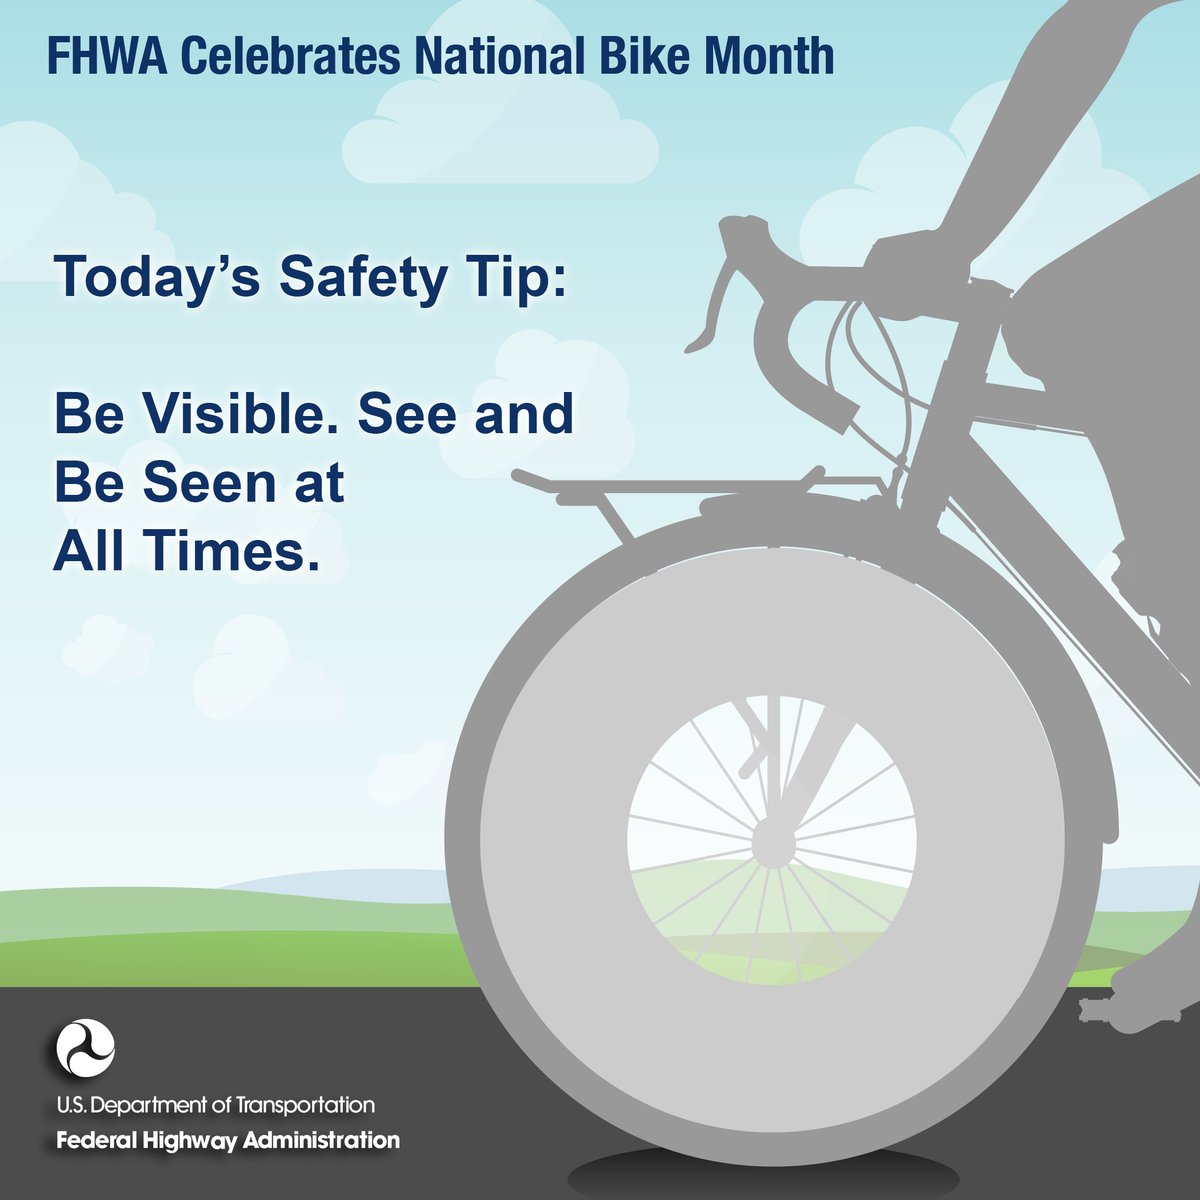 It’s #NationalBikeMonth. Today’s safety tip: be visible. See and be seen at all times. #NationalBicycleMonth